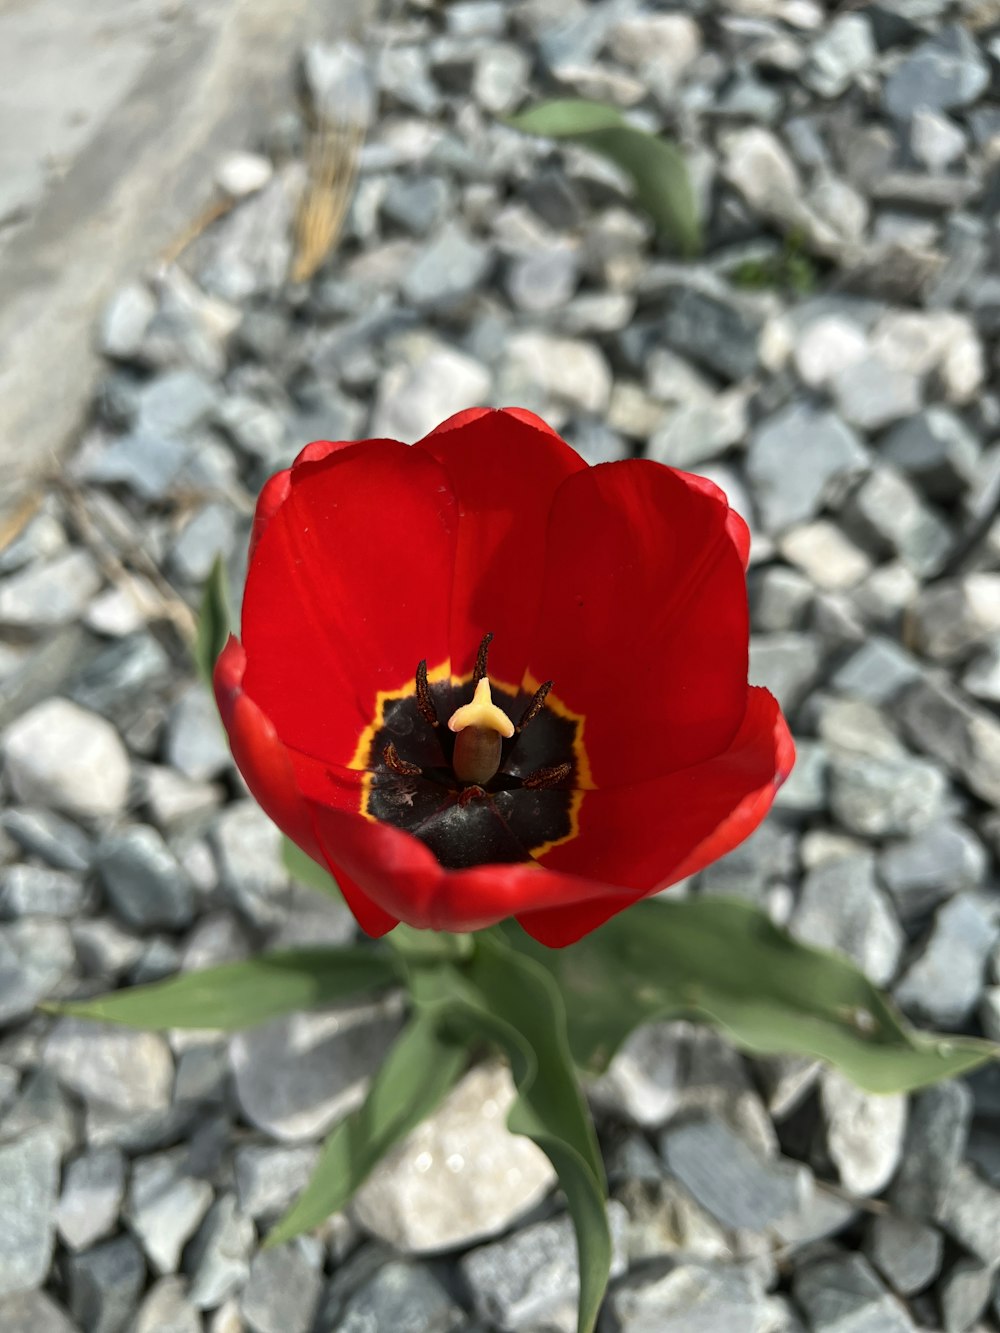 a red flower with a black center